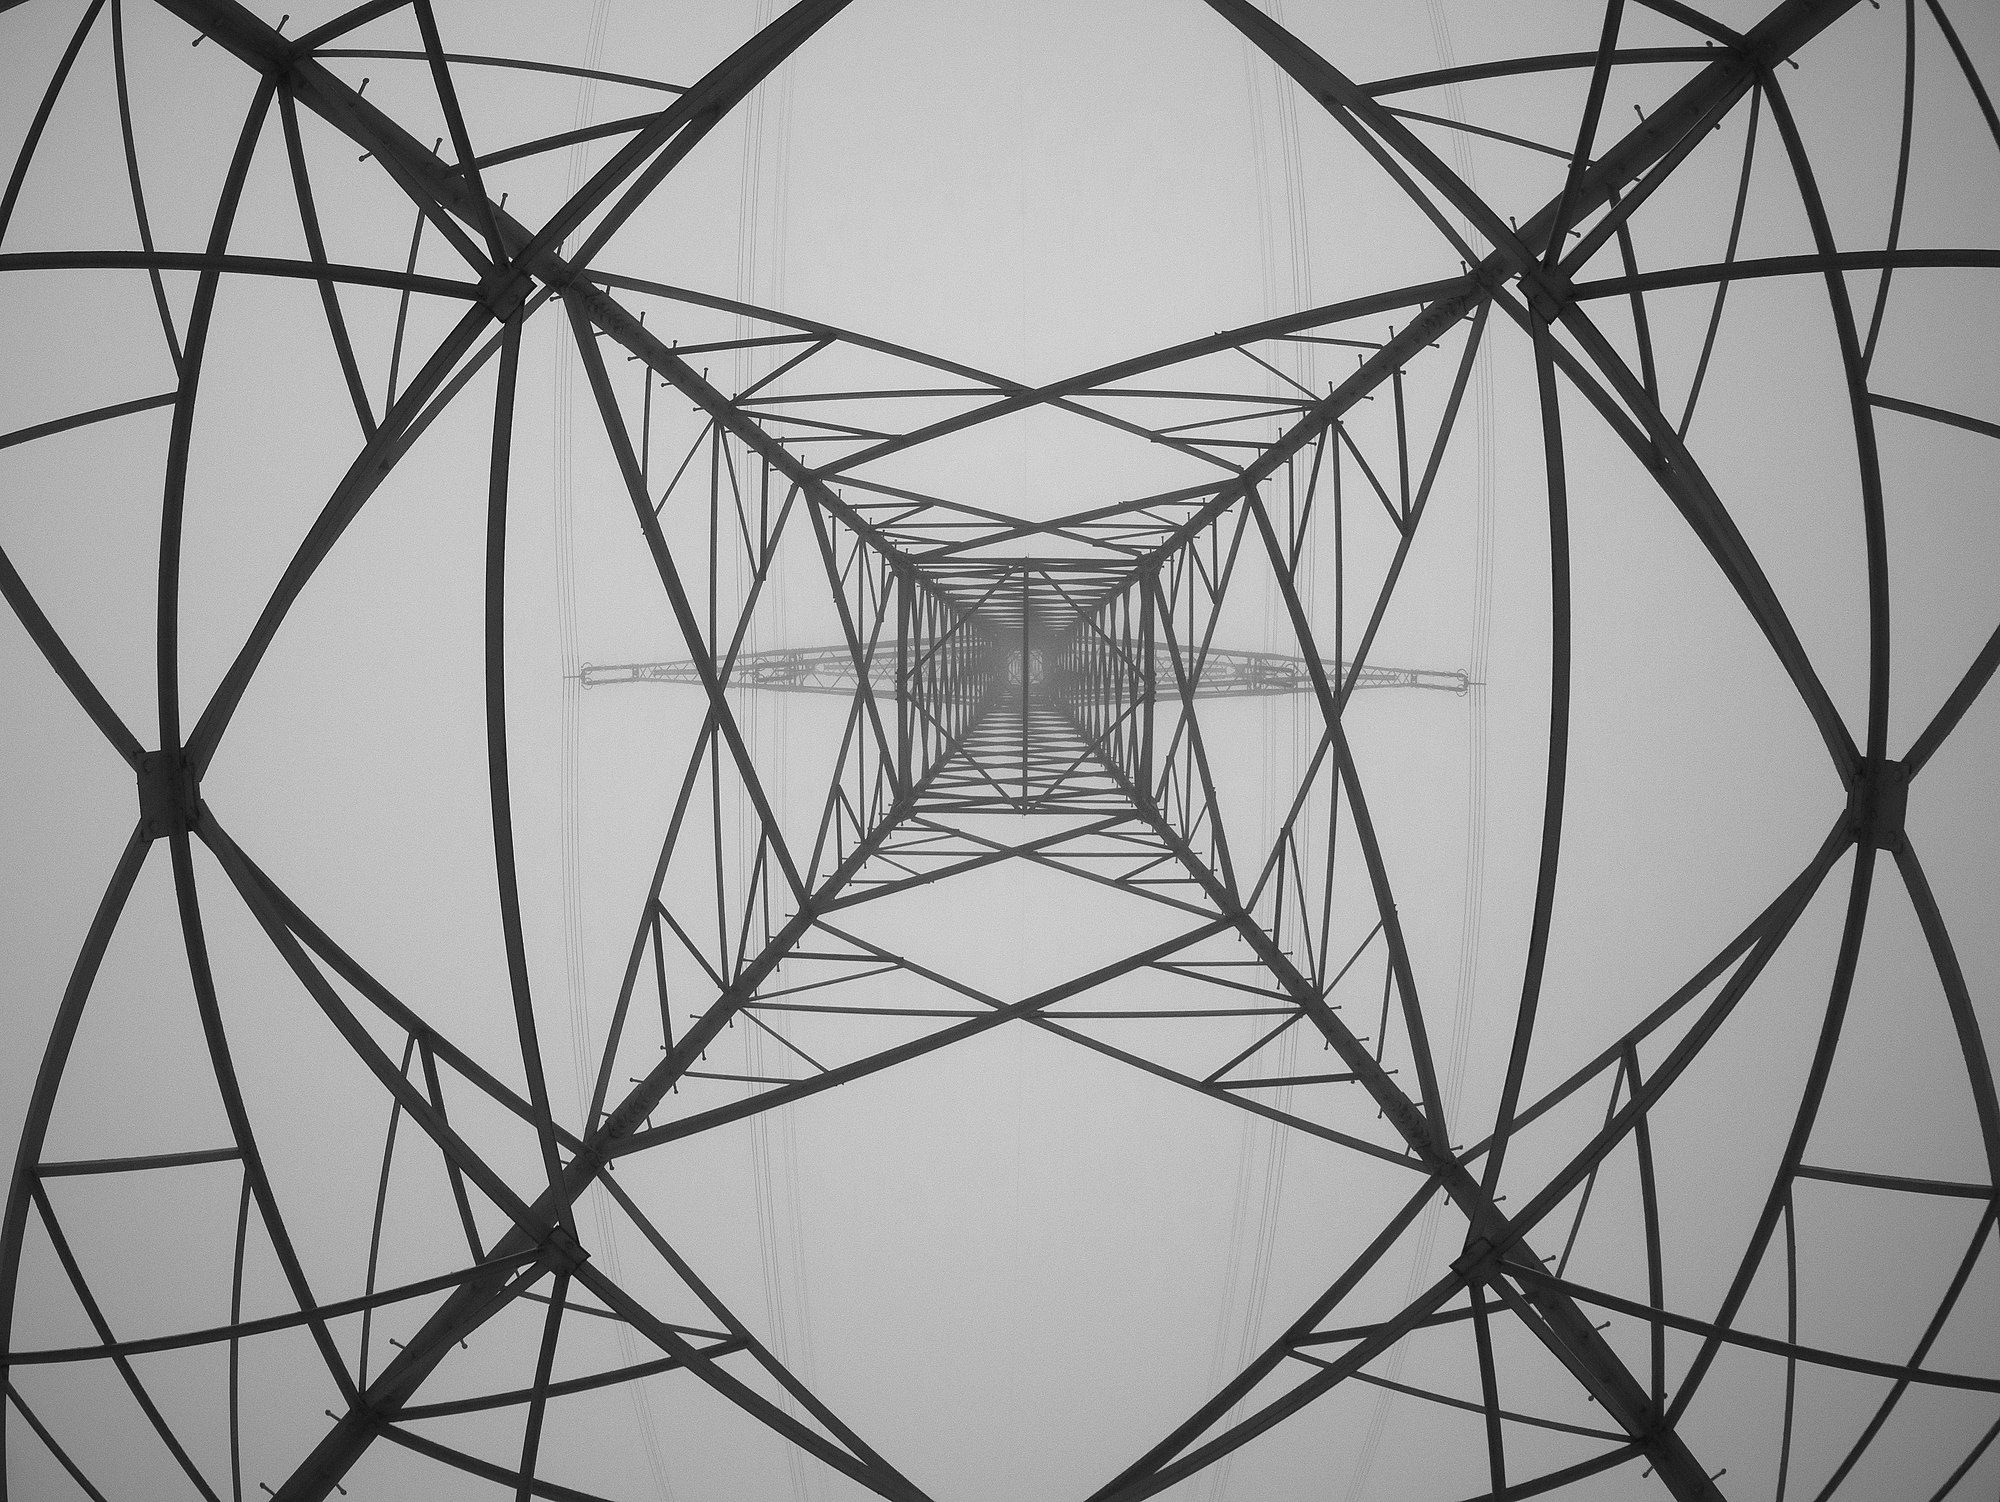 Picture of an electric pylon.